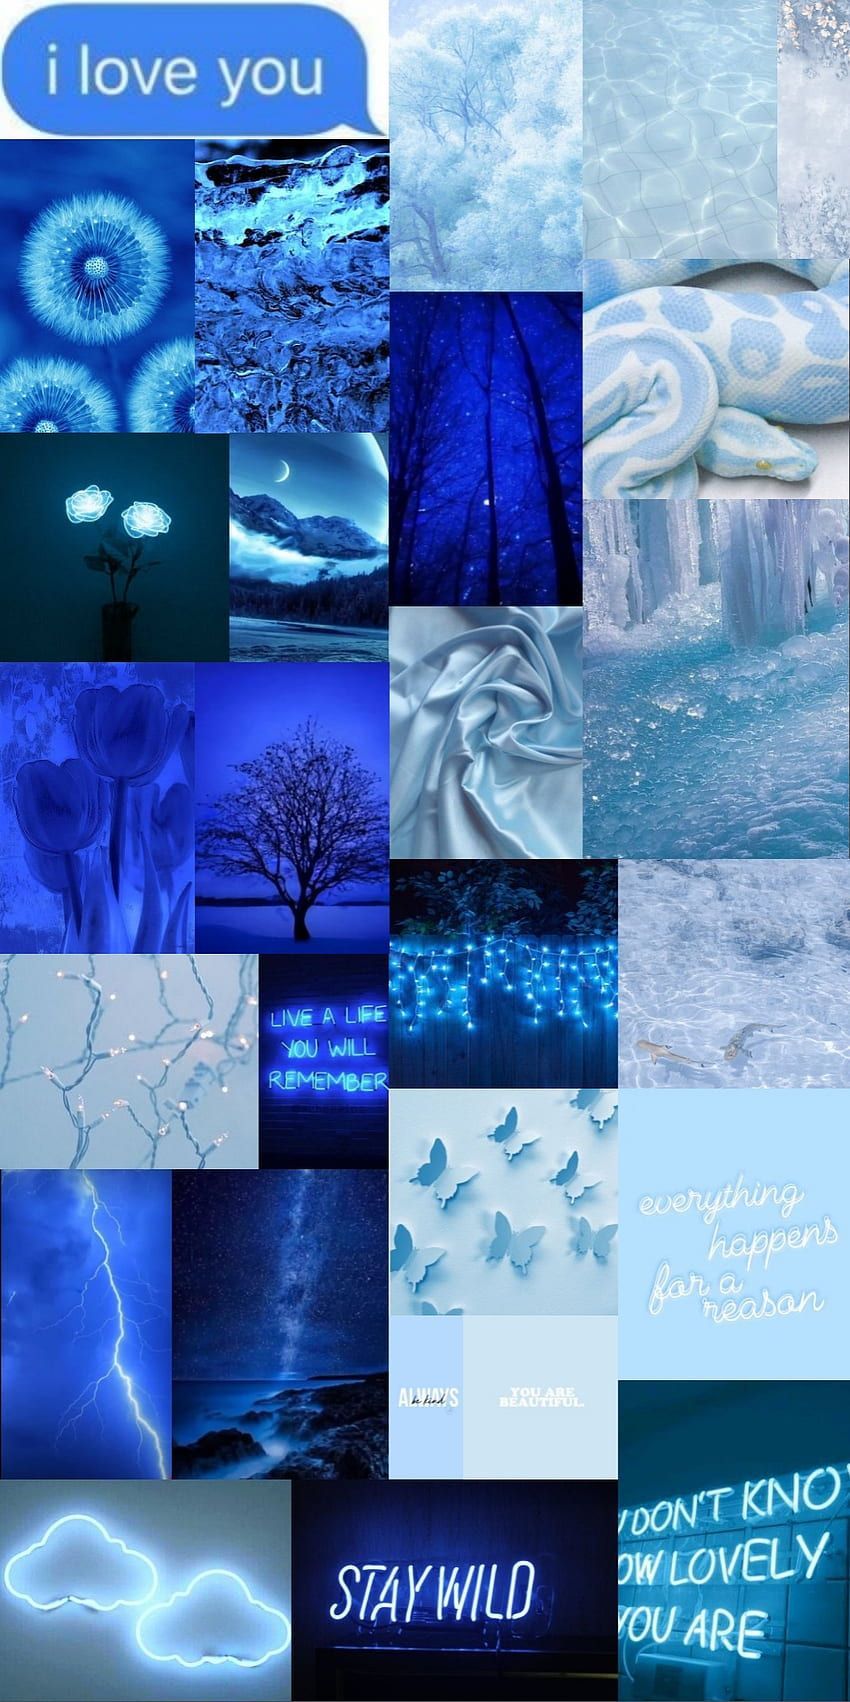 Blue aesthetic wallpaper collage for phone background. - Blue